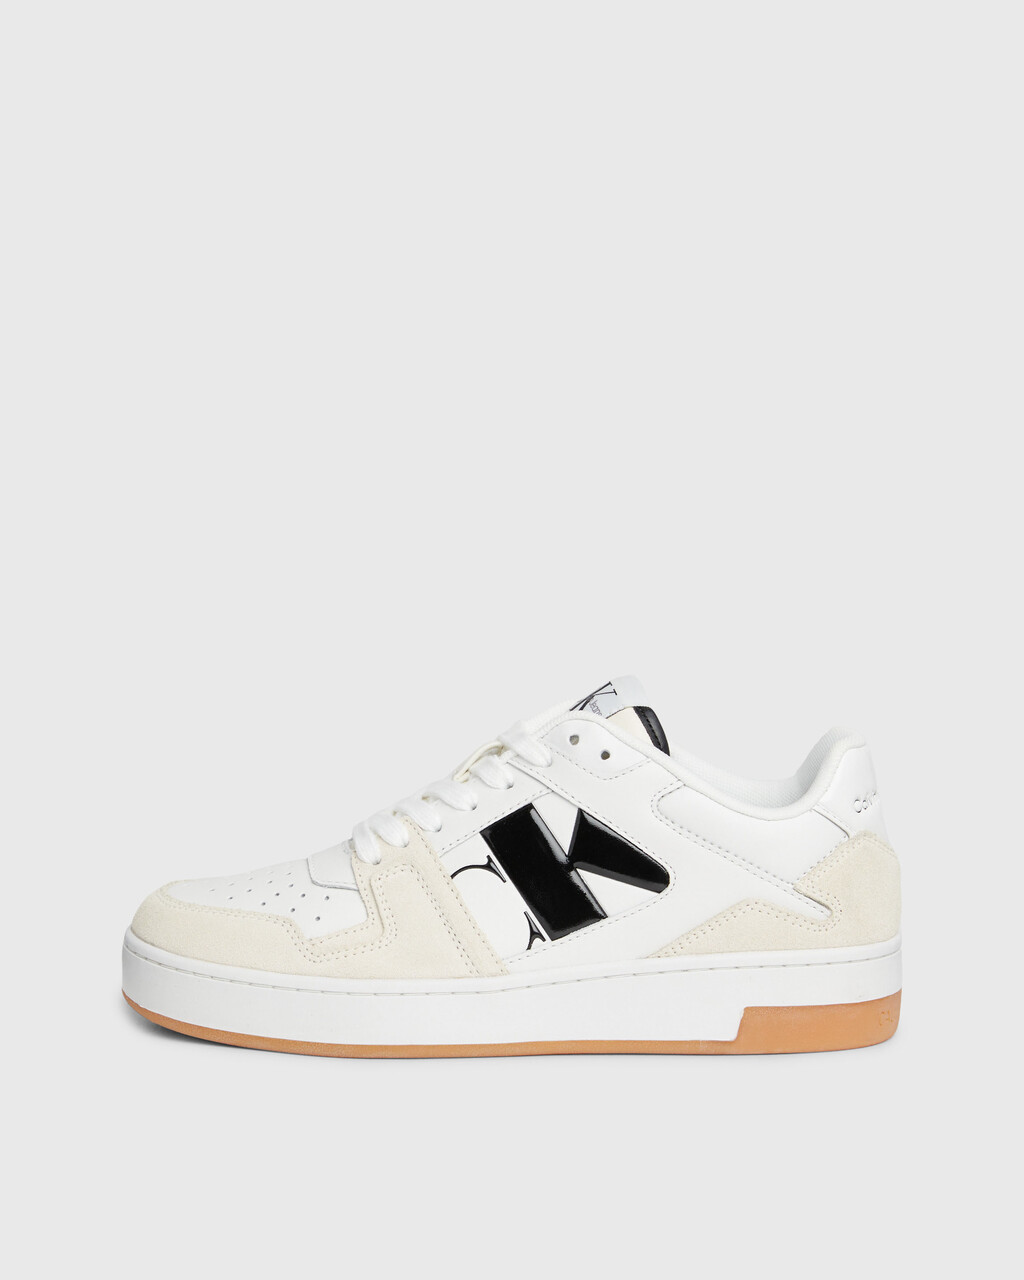 Suede Trainers, WHITE/CREAMY, hi-res